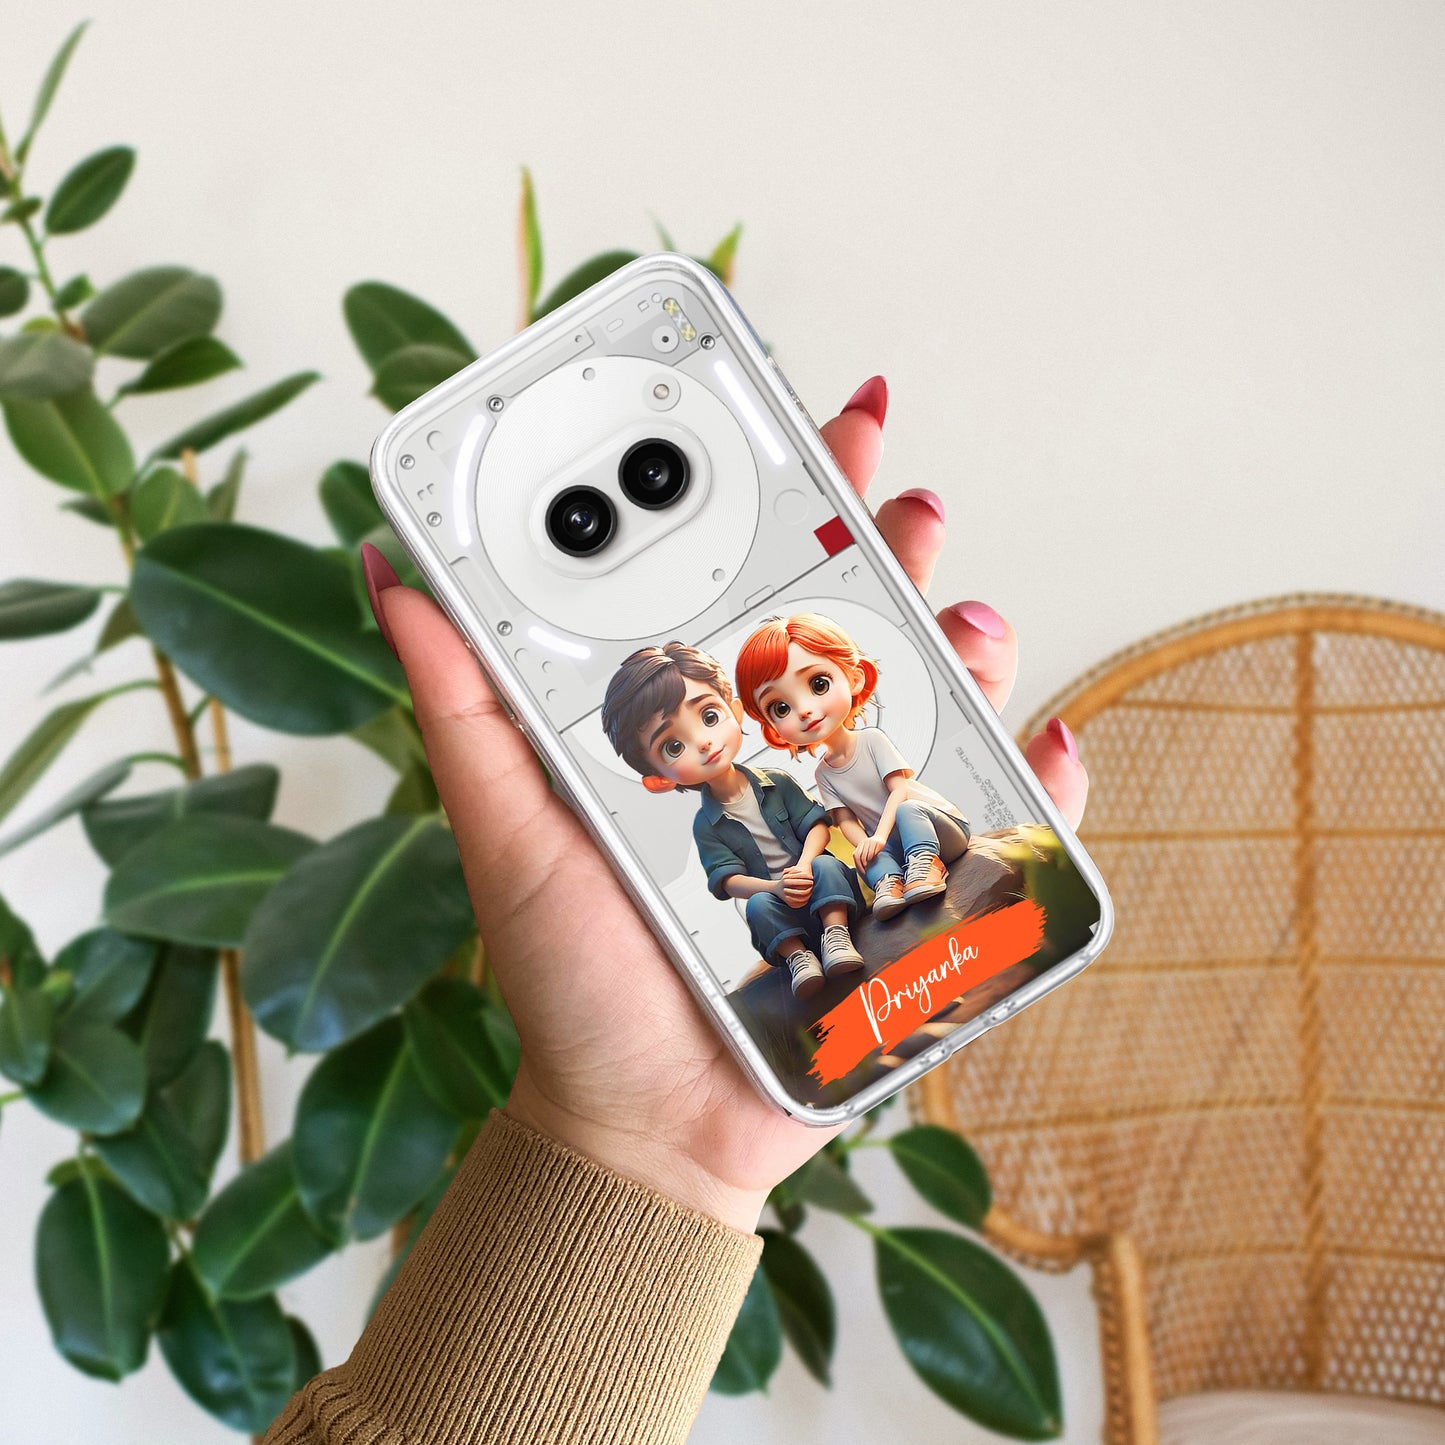 Cute Love Couple Customize Transparent Silicon Case For Nothing